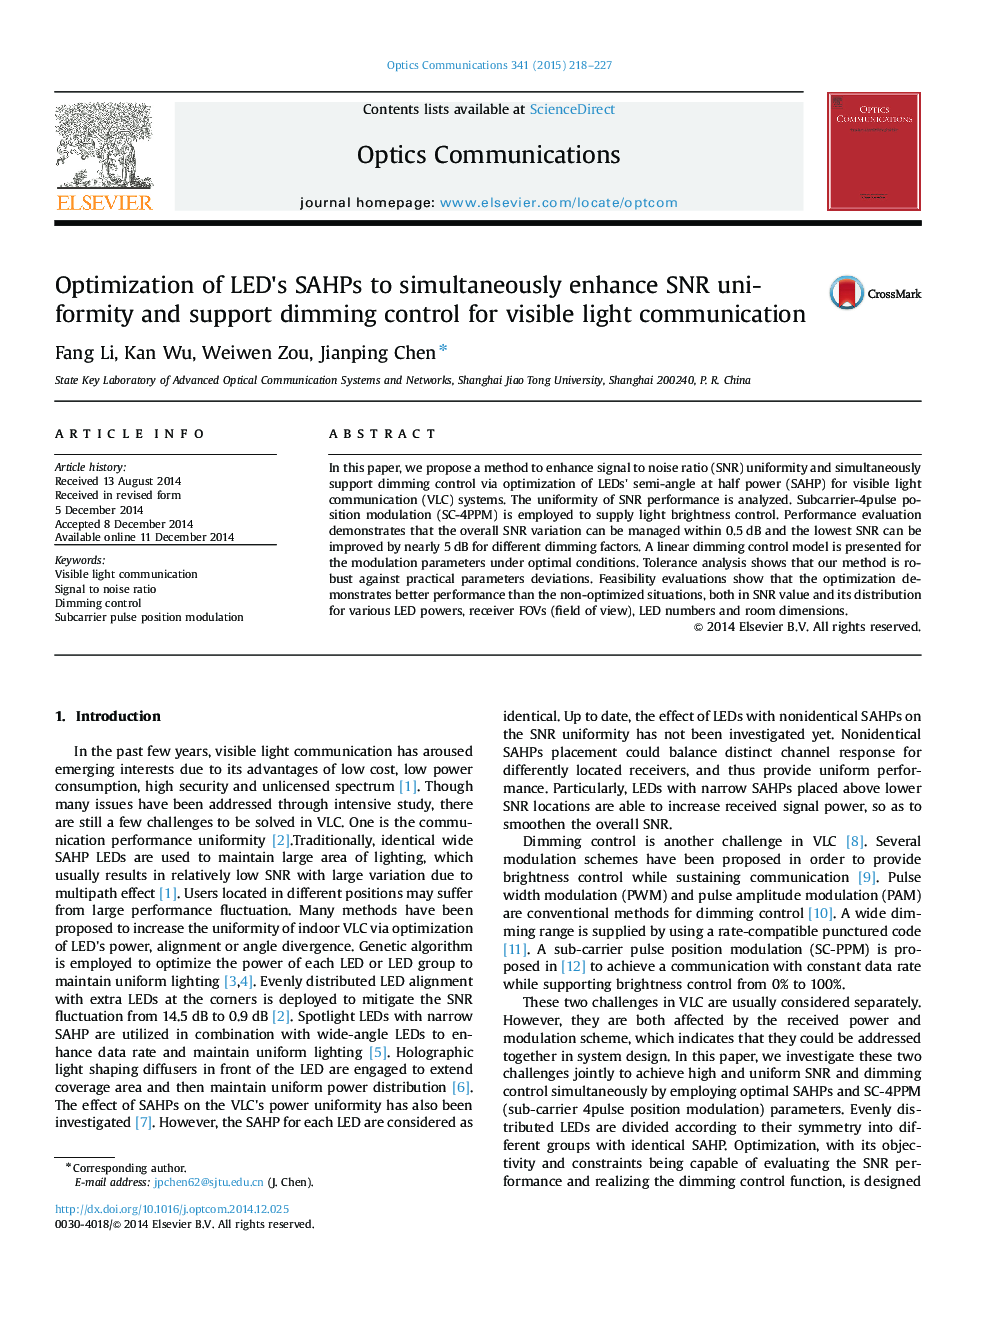 Optimization of LED's SAHPs to simultaneously enhance SNR uniformity and support dimming control for visible light communication